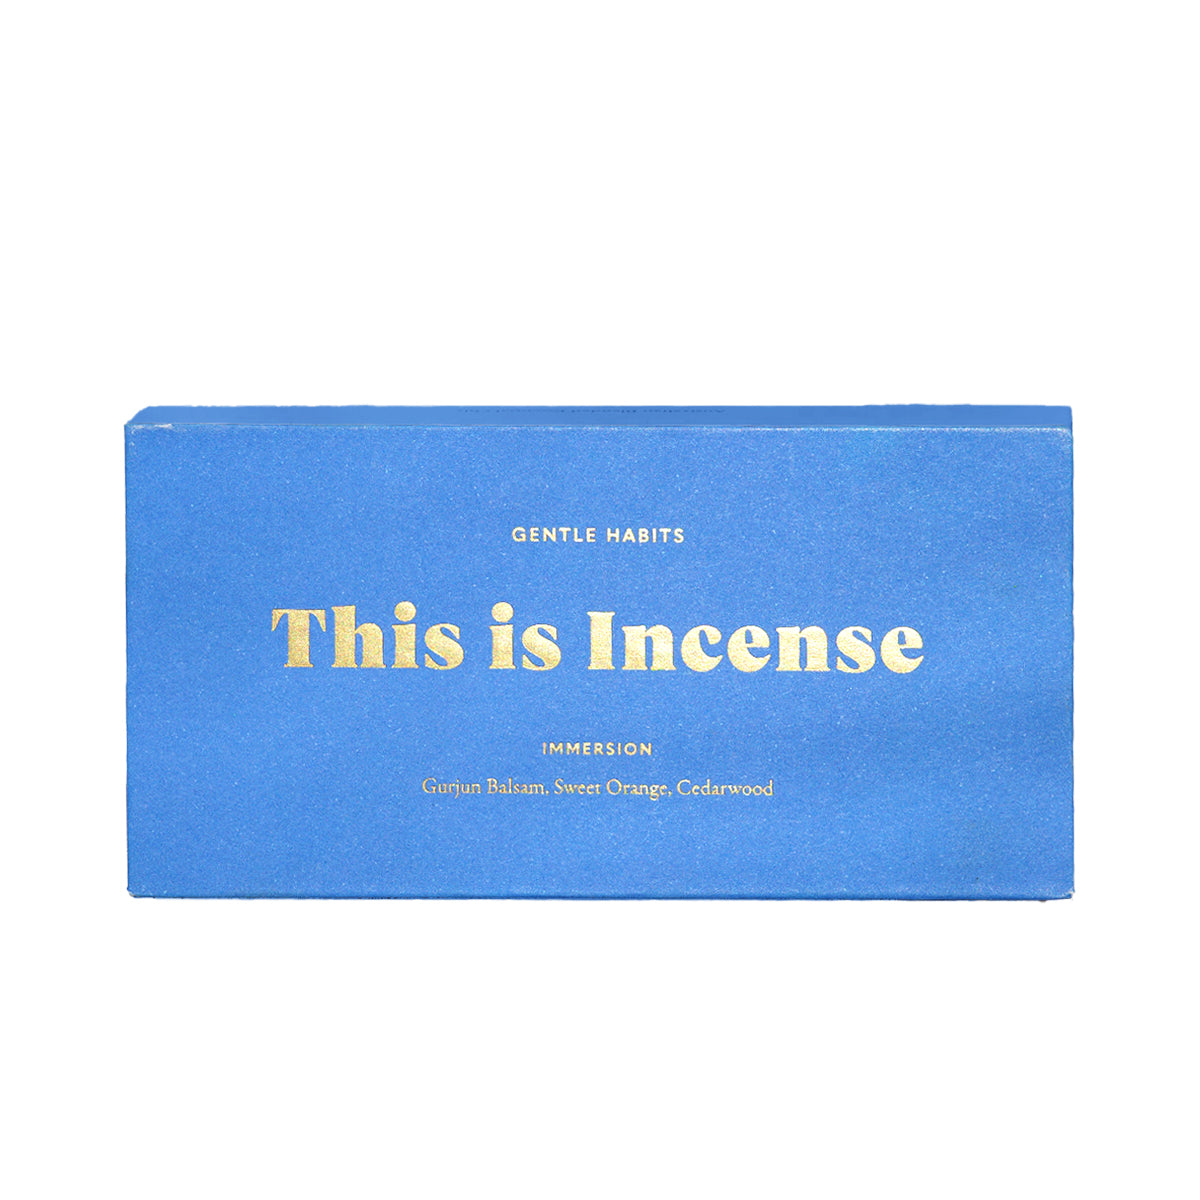 This is Incense - Immersion